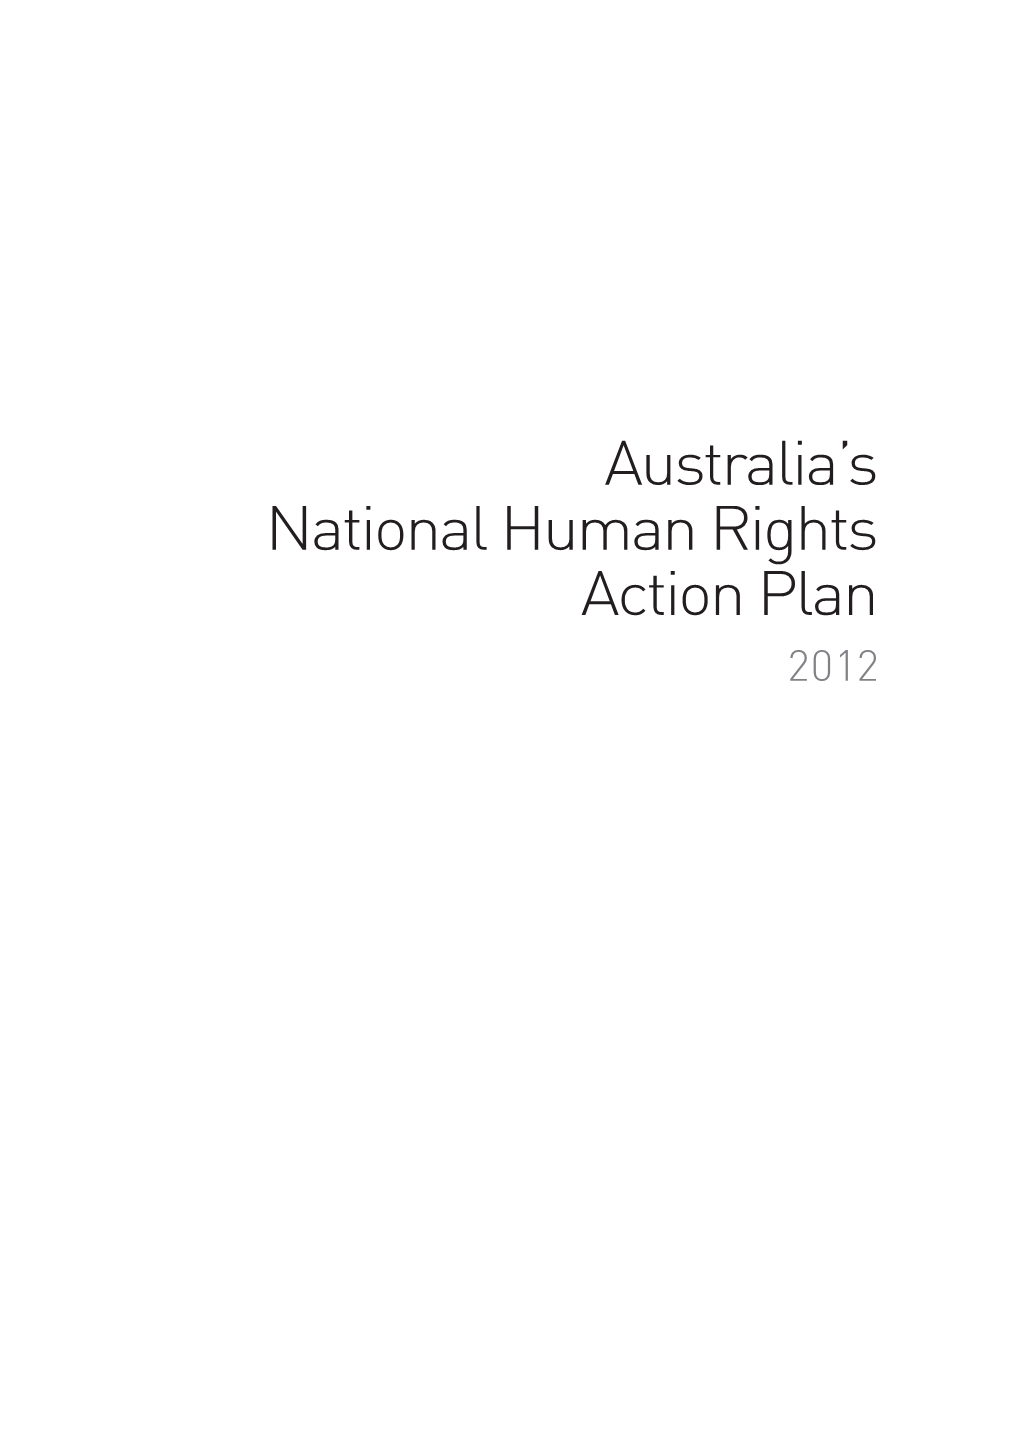 Australia's National Human Rights Action Plan